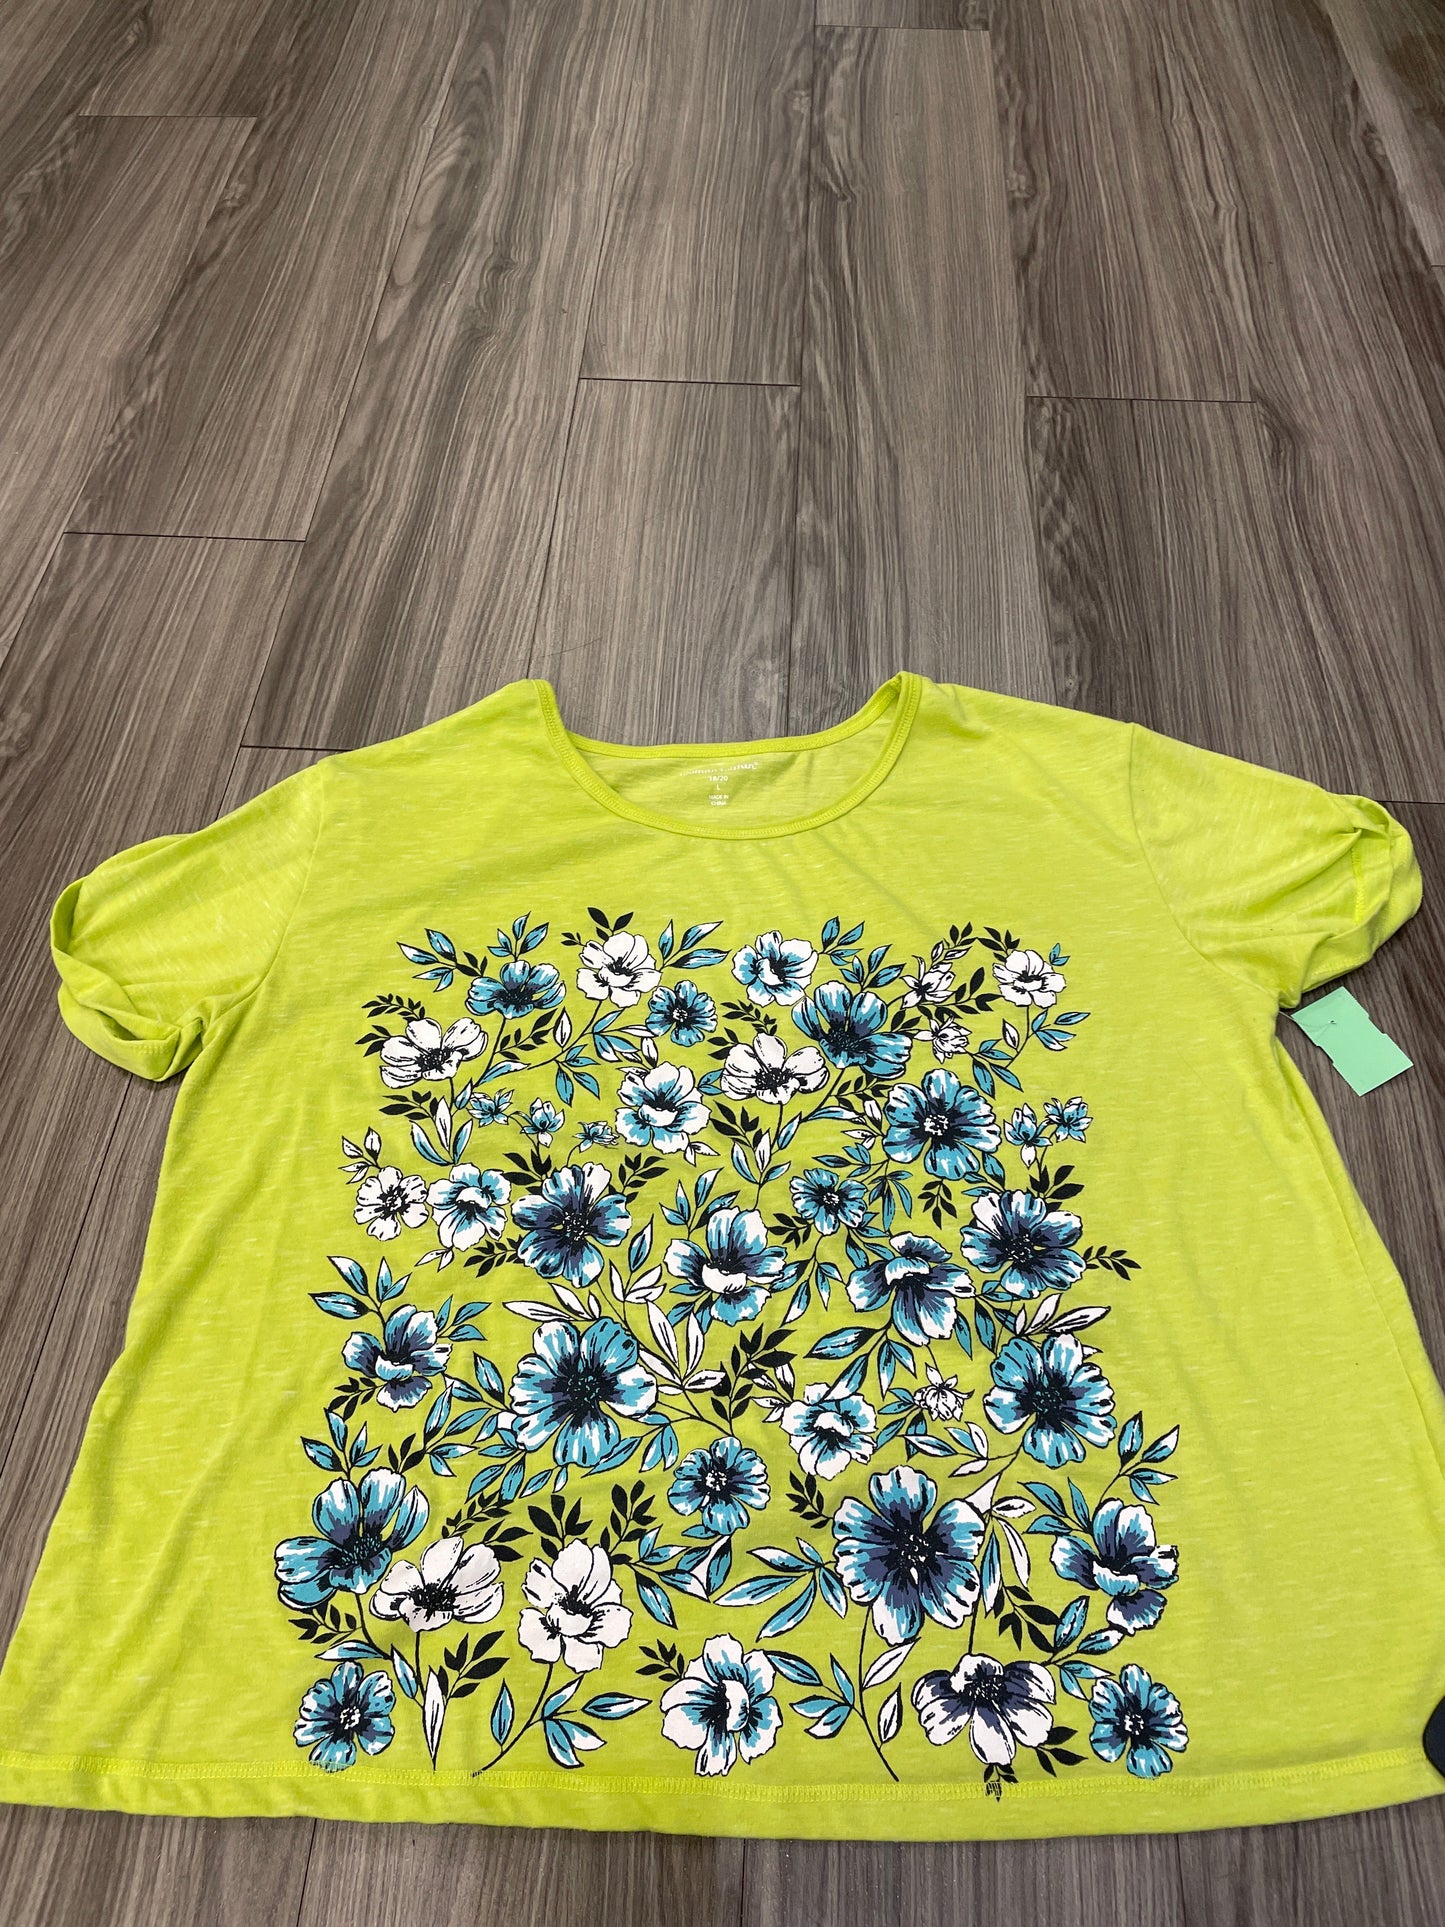 Floral Print Top Short Sleeve Woman Within, Size 18